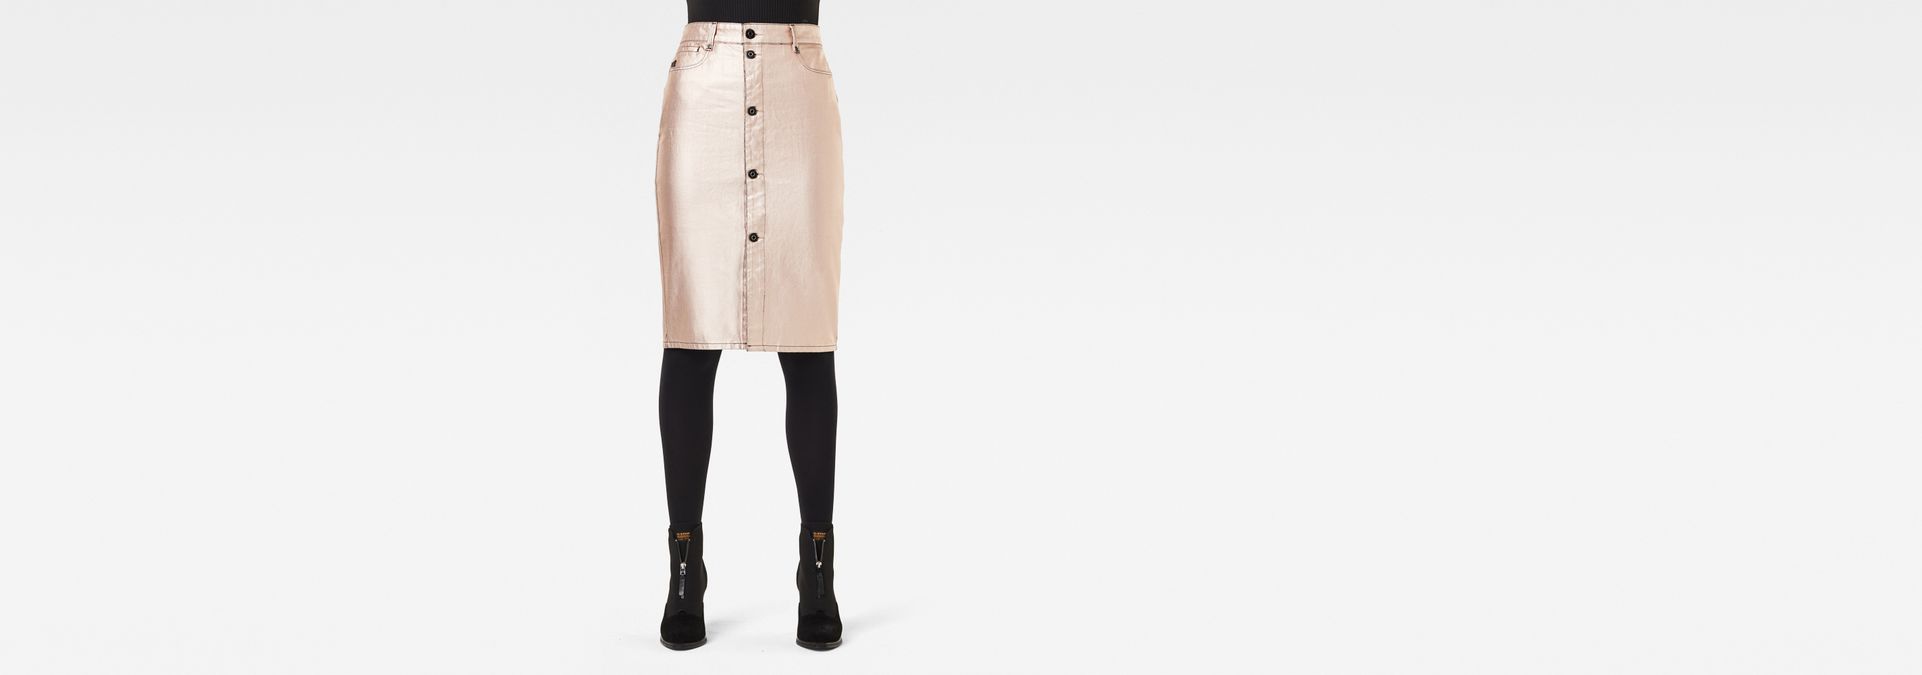 Noxer Button Pencil Skirt | メタリック | G-Star RAW®